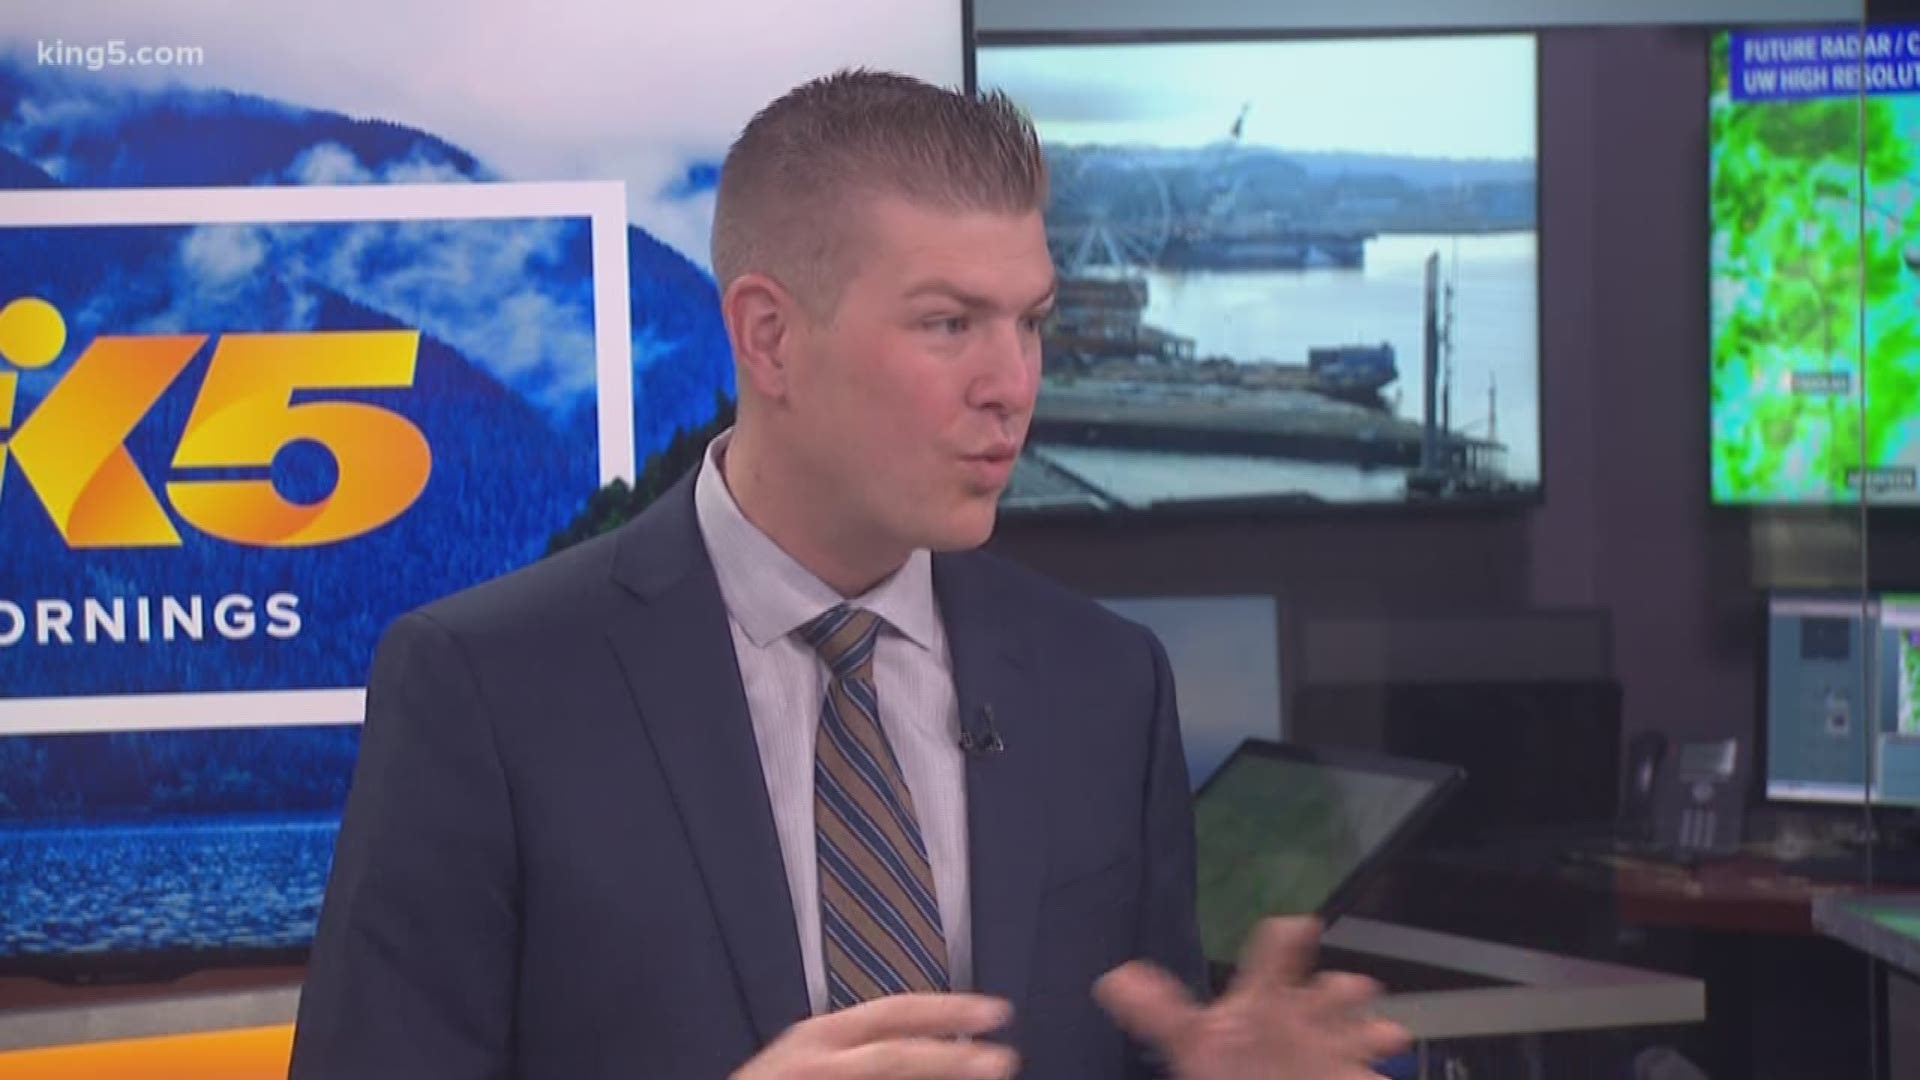 Financial Advisor David Stryzewski from Sound Planning Group discusses the likelihood of a recession and what he's telling investors to do about it.